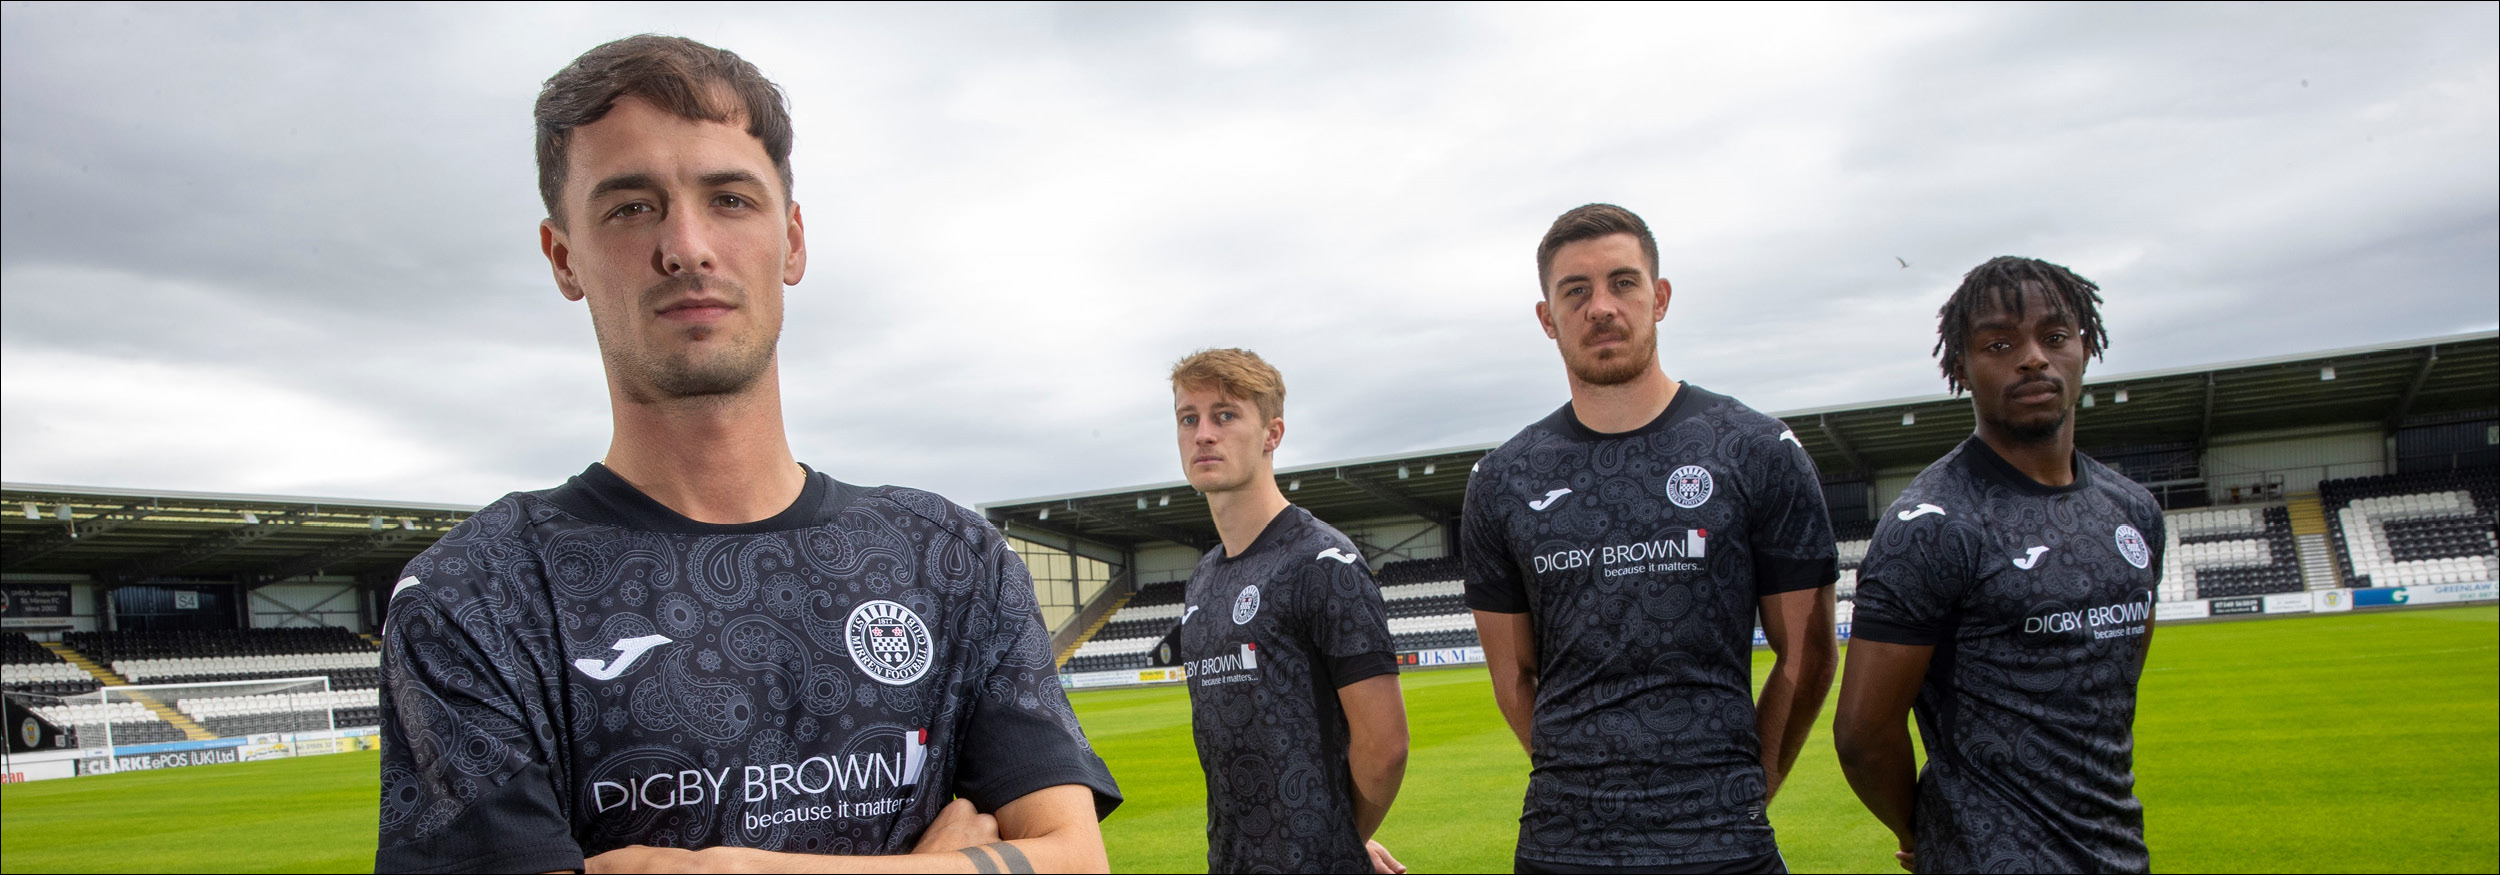 Away kit update - pre-orders available from Thursday morning